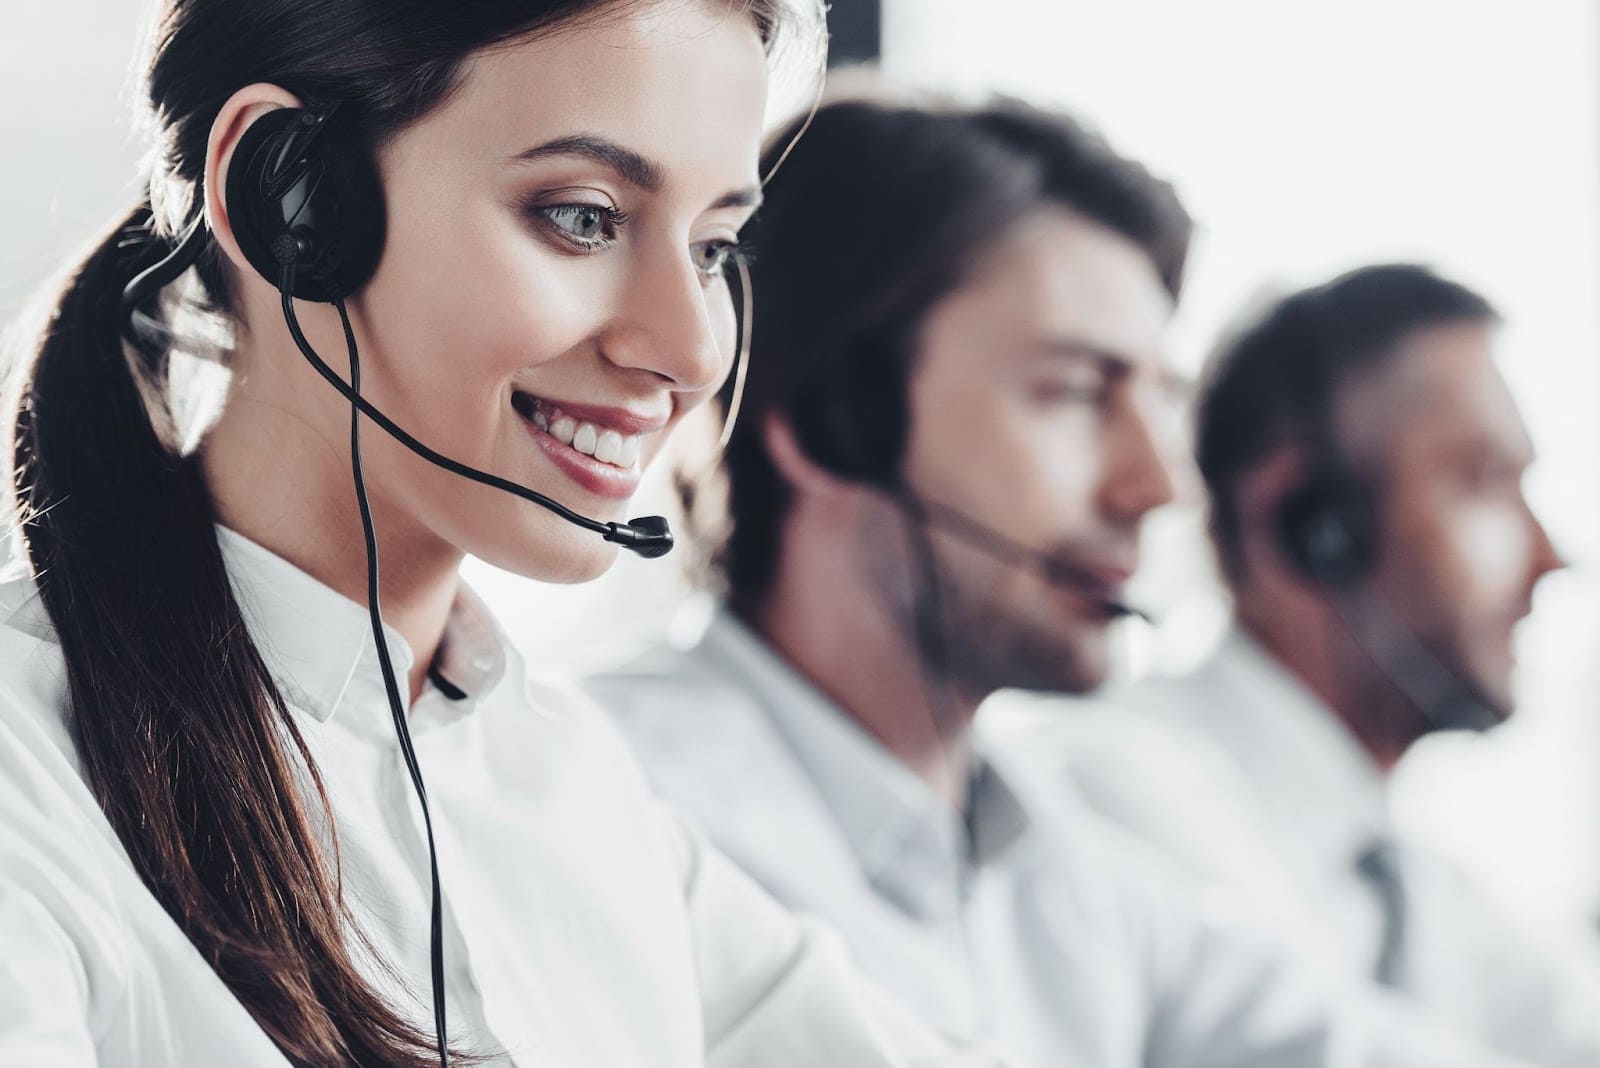 How to be a successful telemarketer